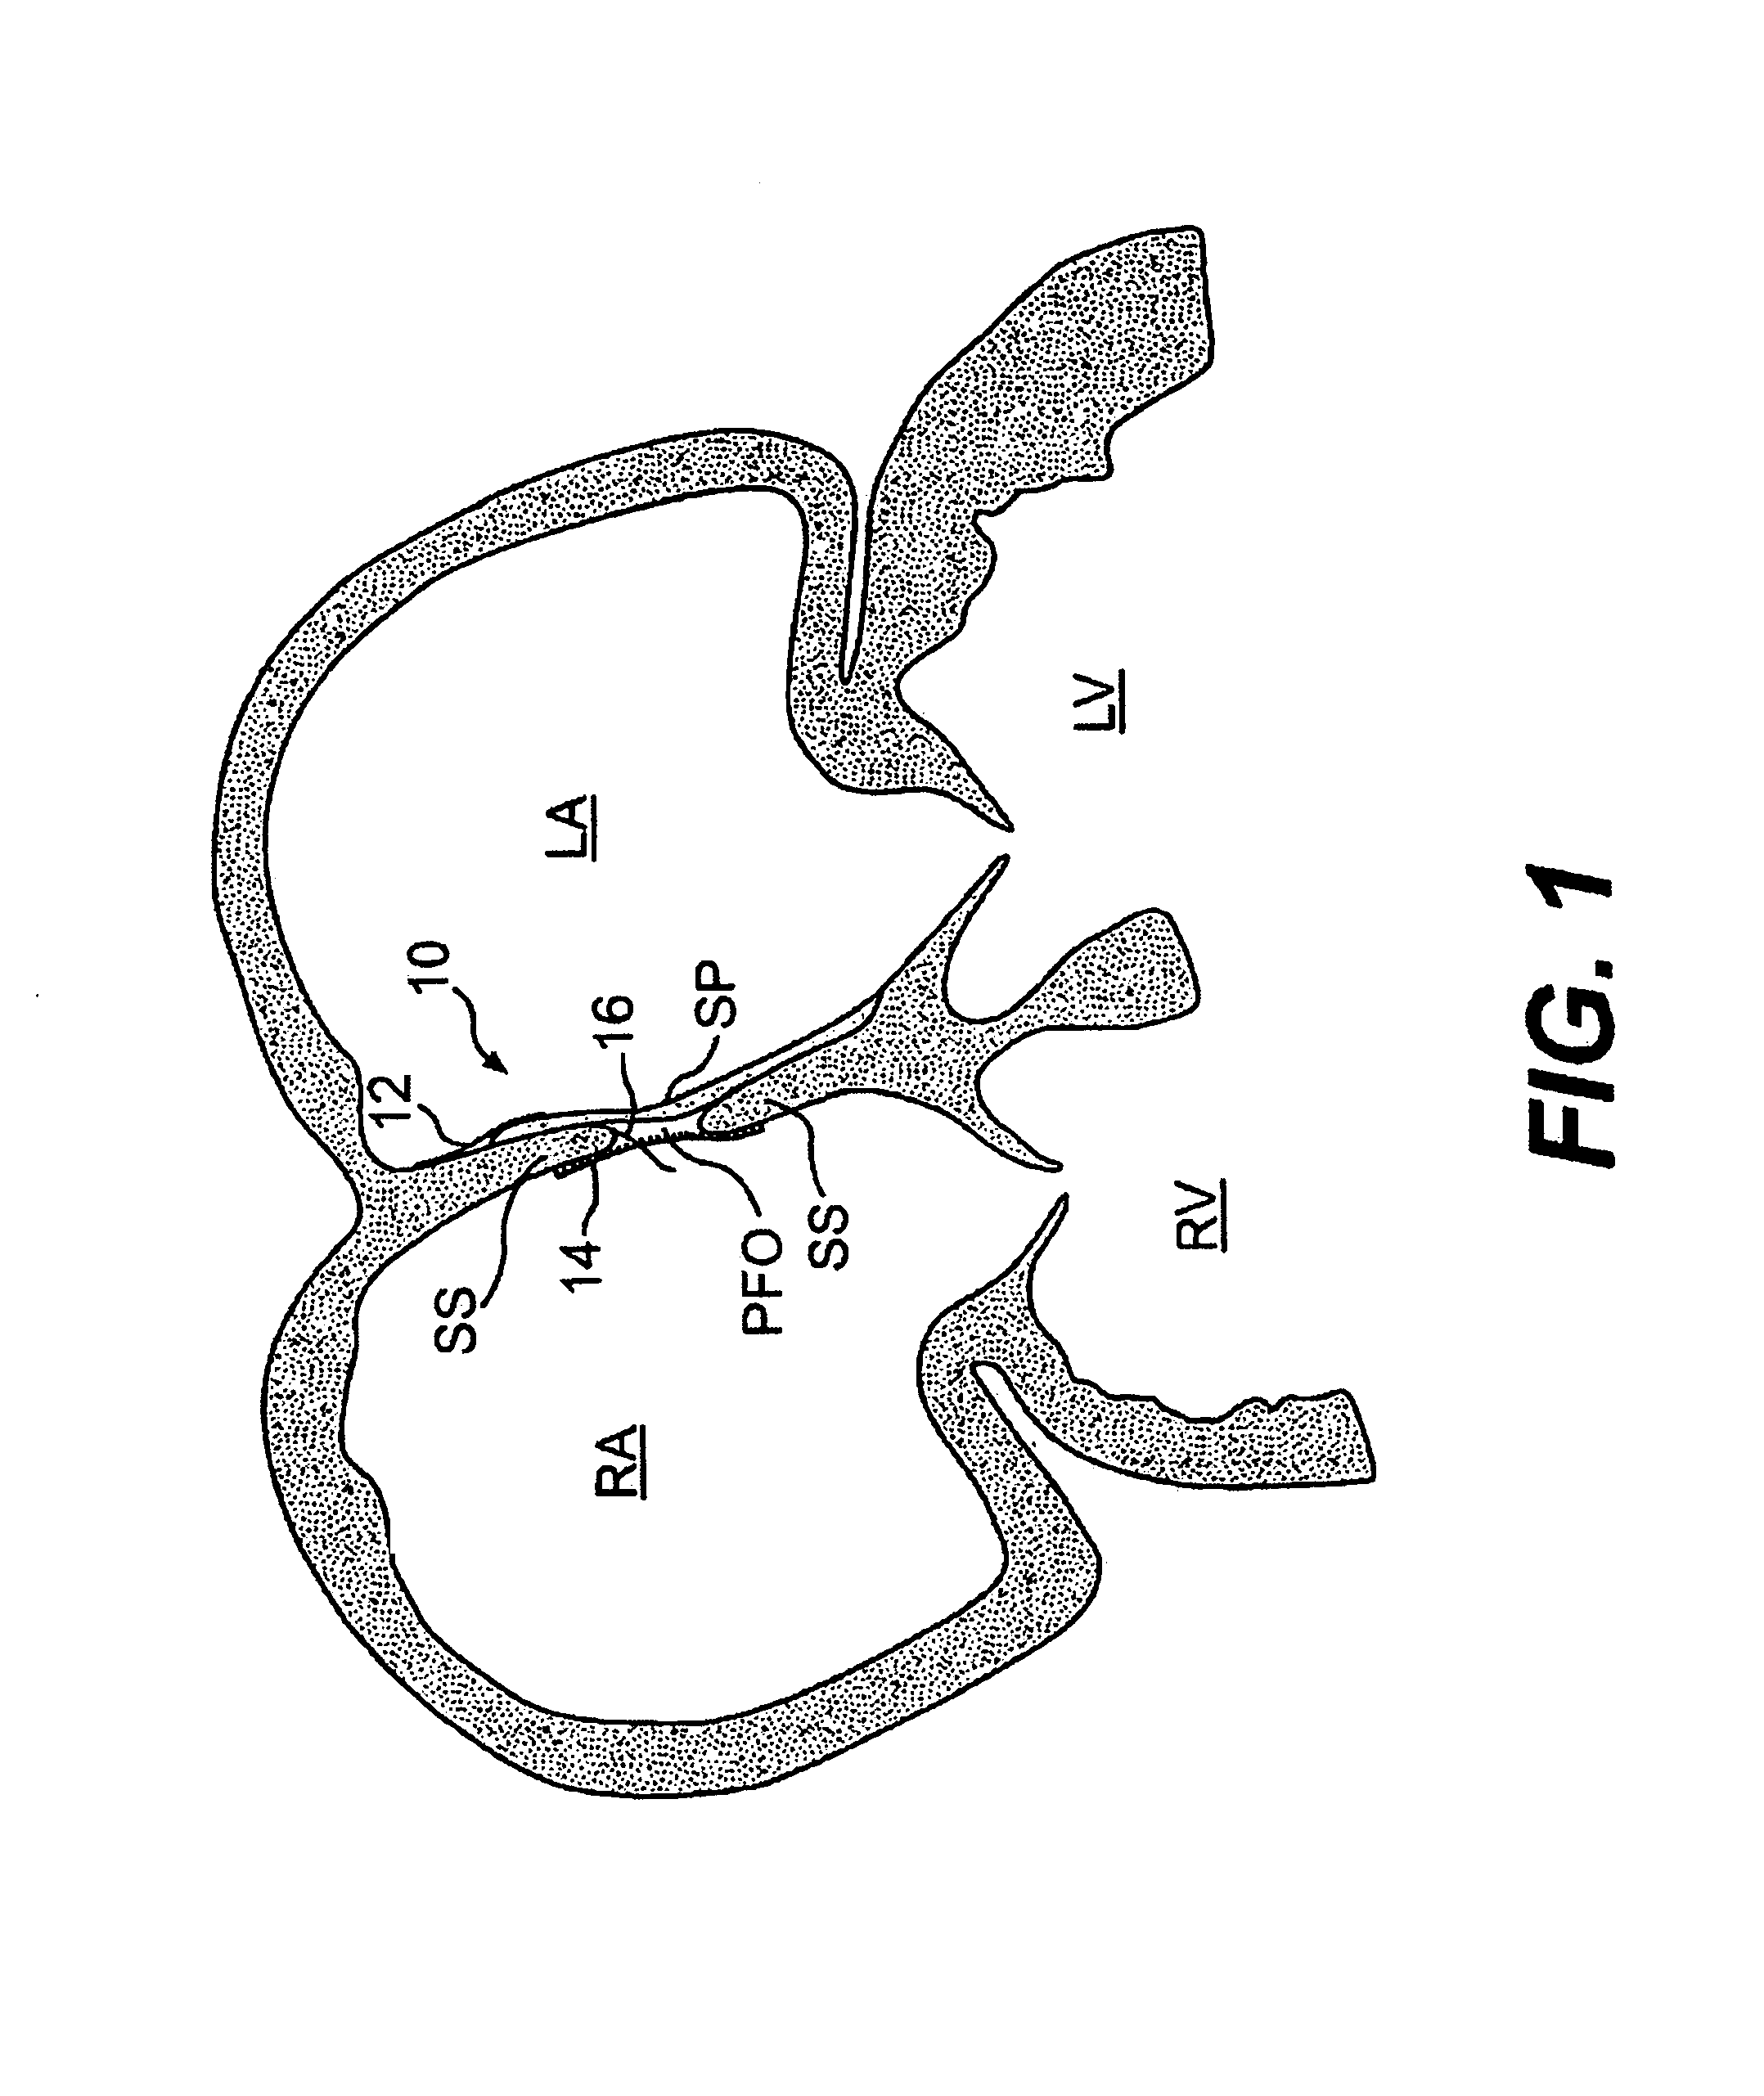 Closure devices, related delivery methods and tools, and related methods of use